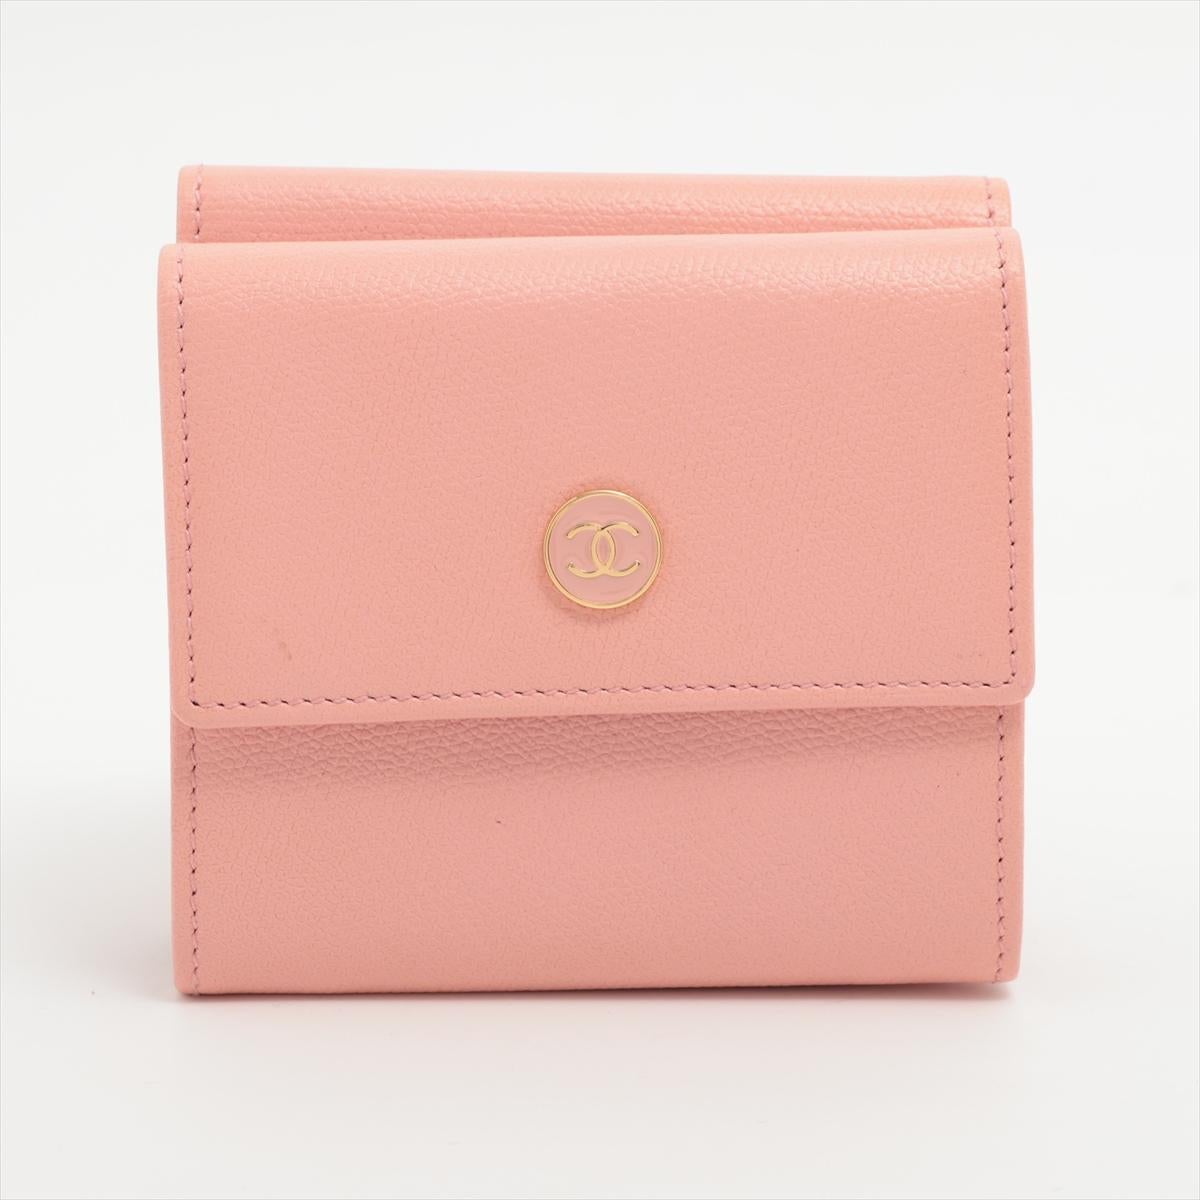 The Chanel CC Logo Button Compact Wallet in Pink is a charming and elegant accessory that seamlessly blends iconic design with a playful touch. Crafted with precision and attention to detail, the compact wallet features a delightful pink hue that